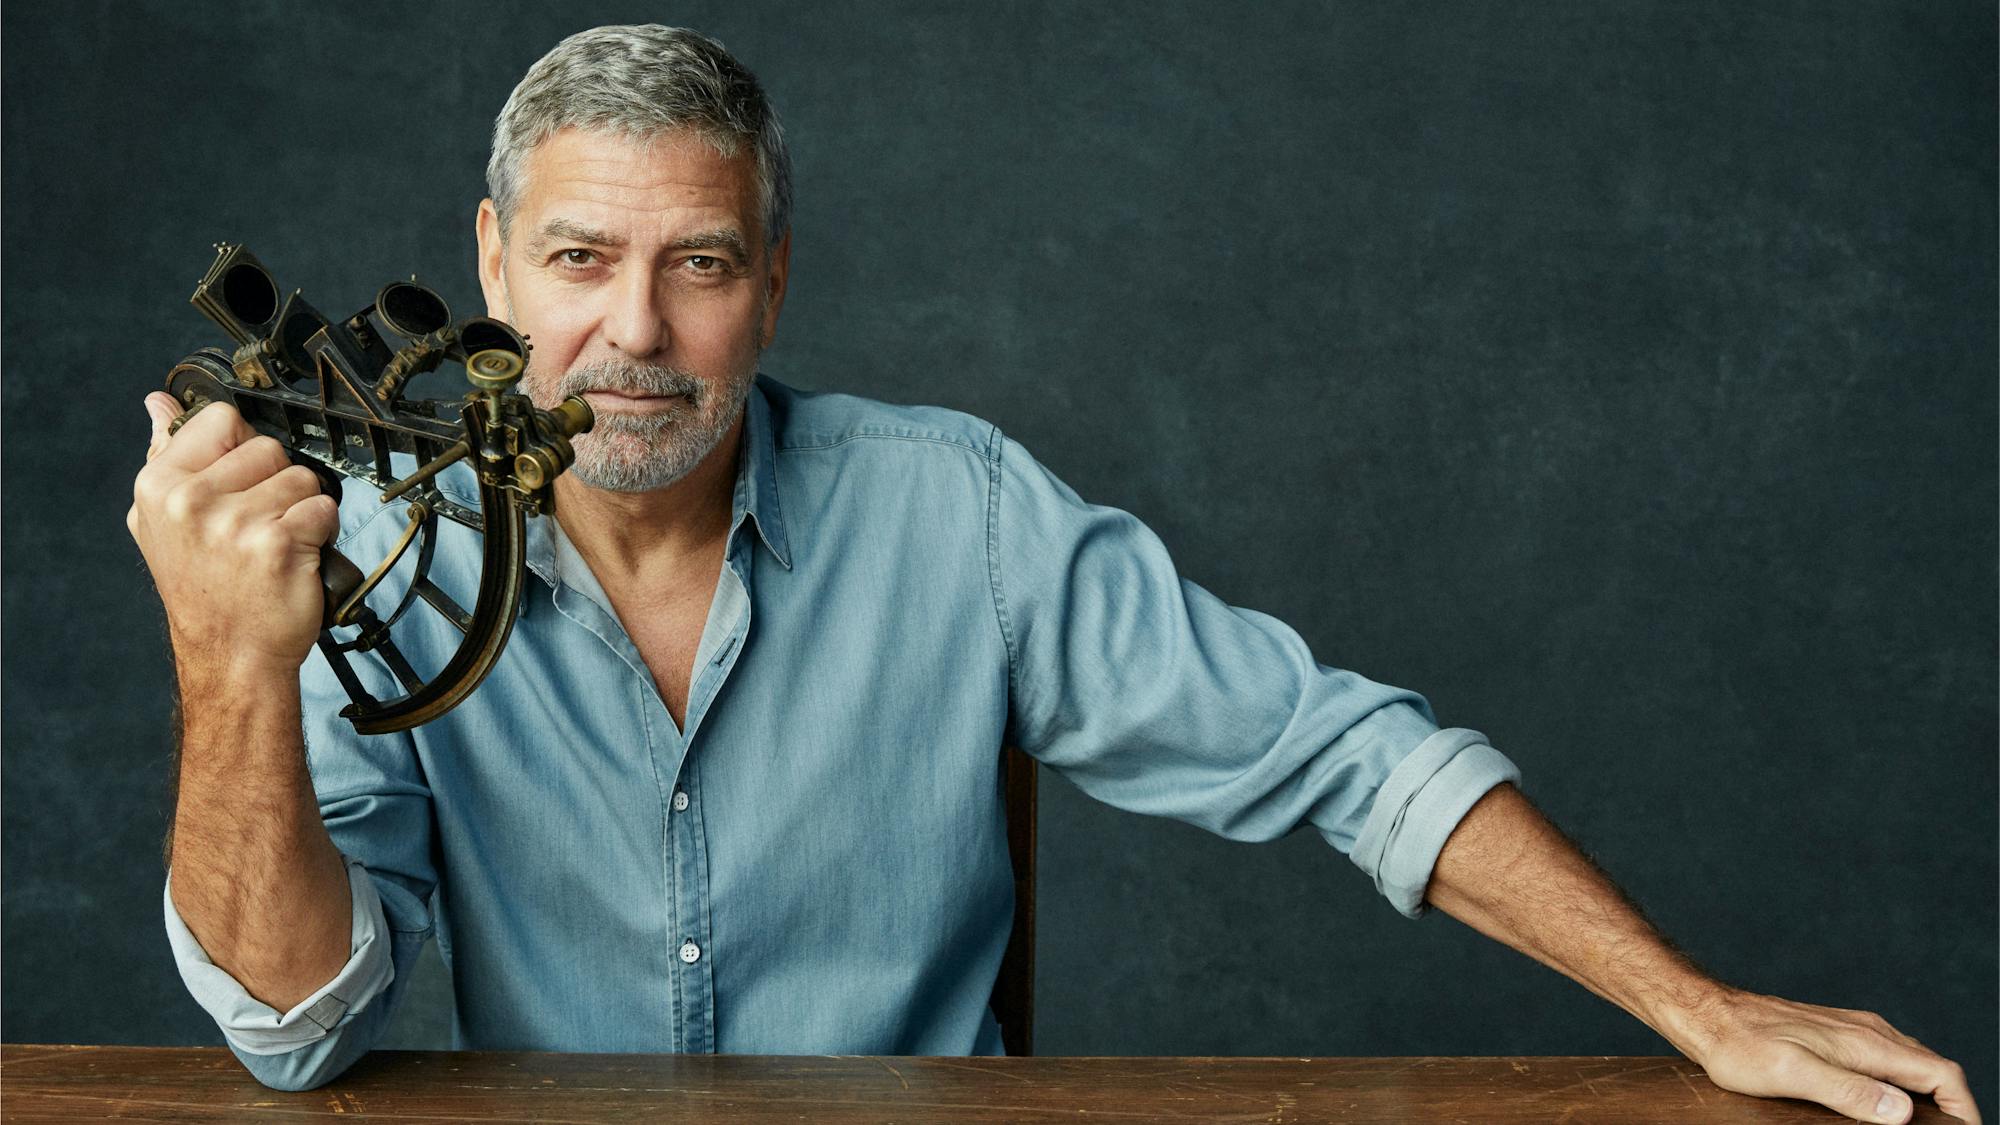 George Clooney sits in front of a dark wood table, wearing a light-blue denim shirt, sleeves rolled up, holding a sextant.